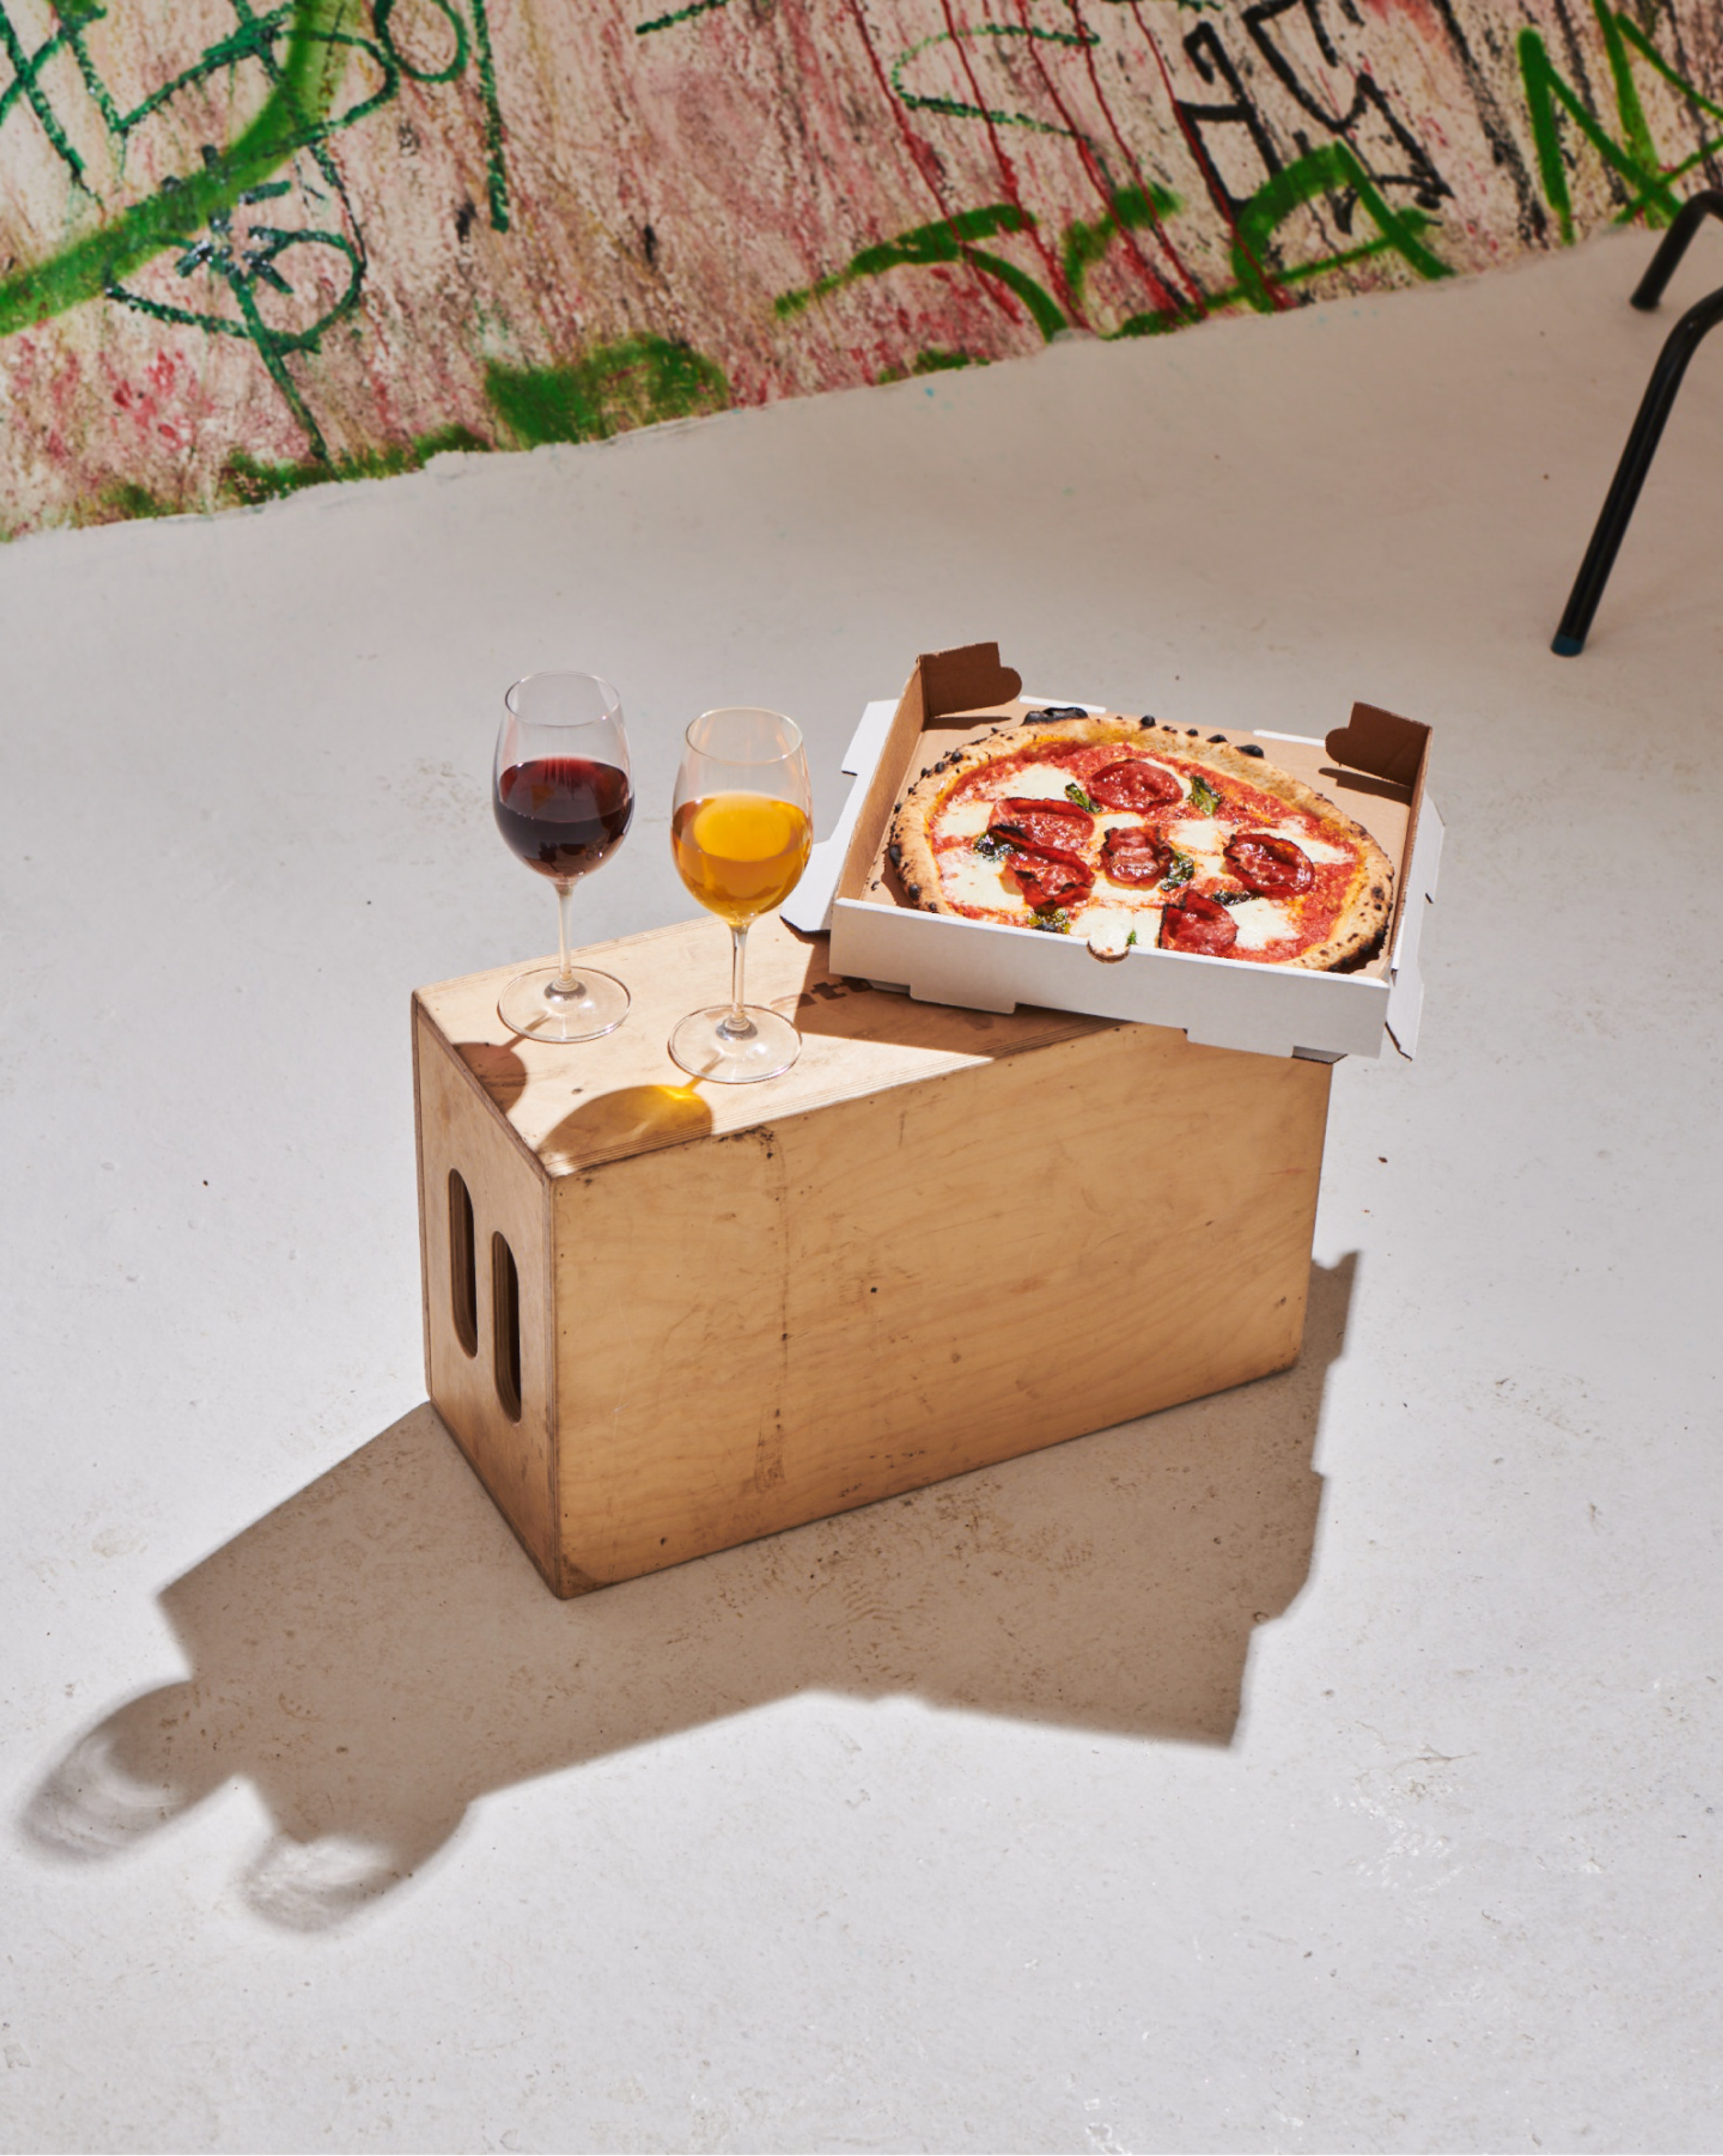 photograph of roberta's pizza and two wine glasses set on a wood box